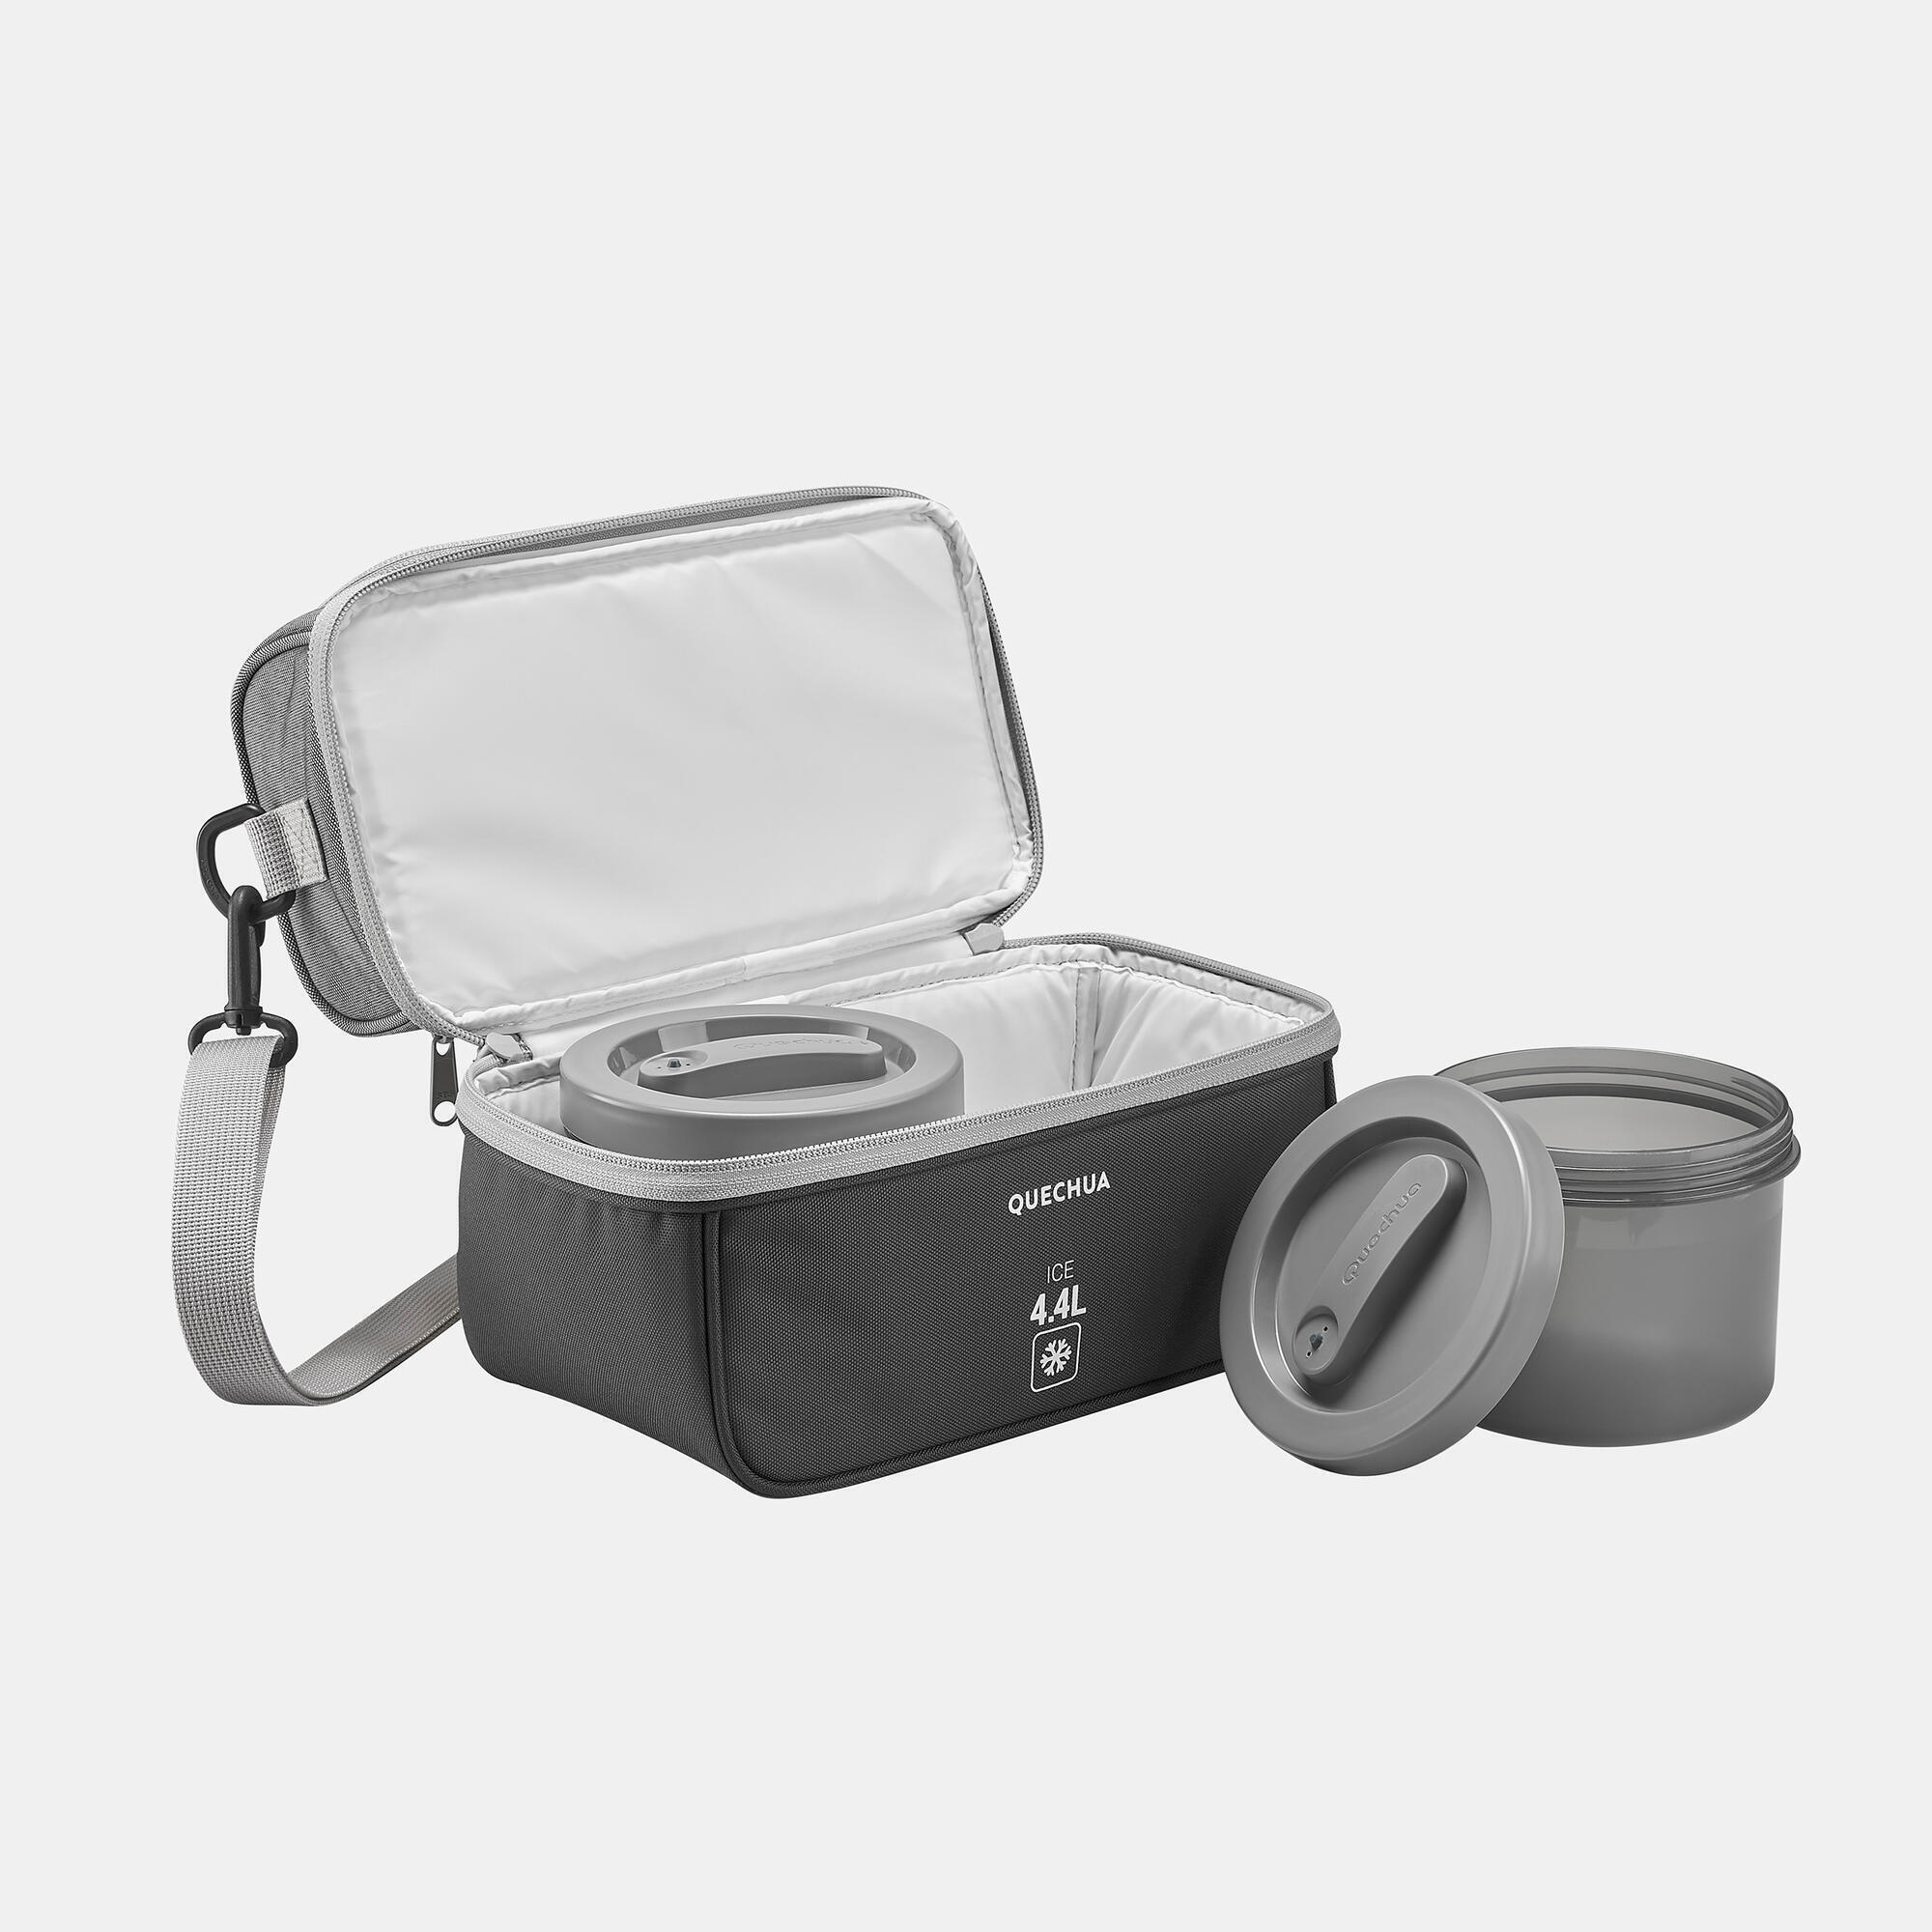 Insulated lunch box 100 - 4.4 Litres - 2 food storage boxes included 4/9